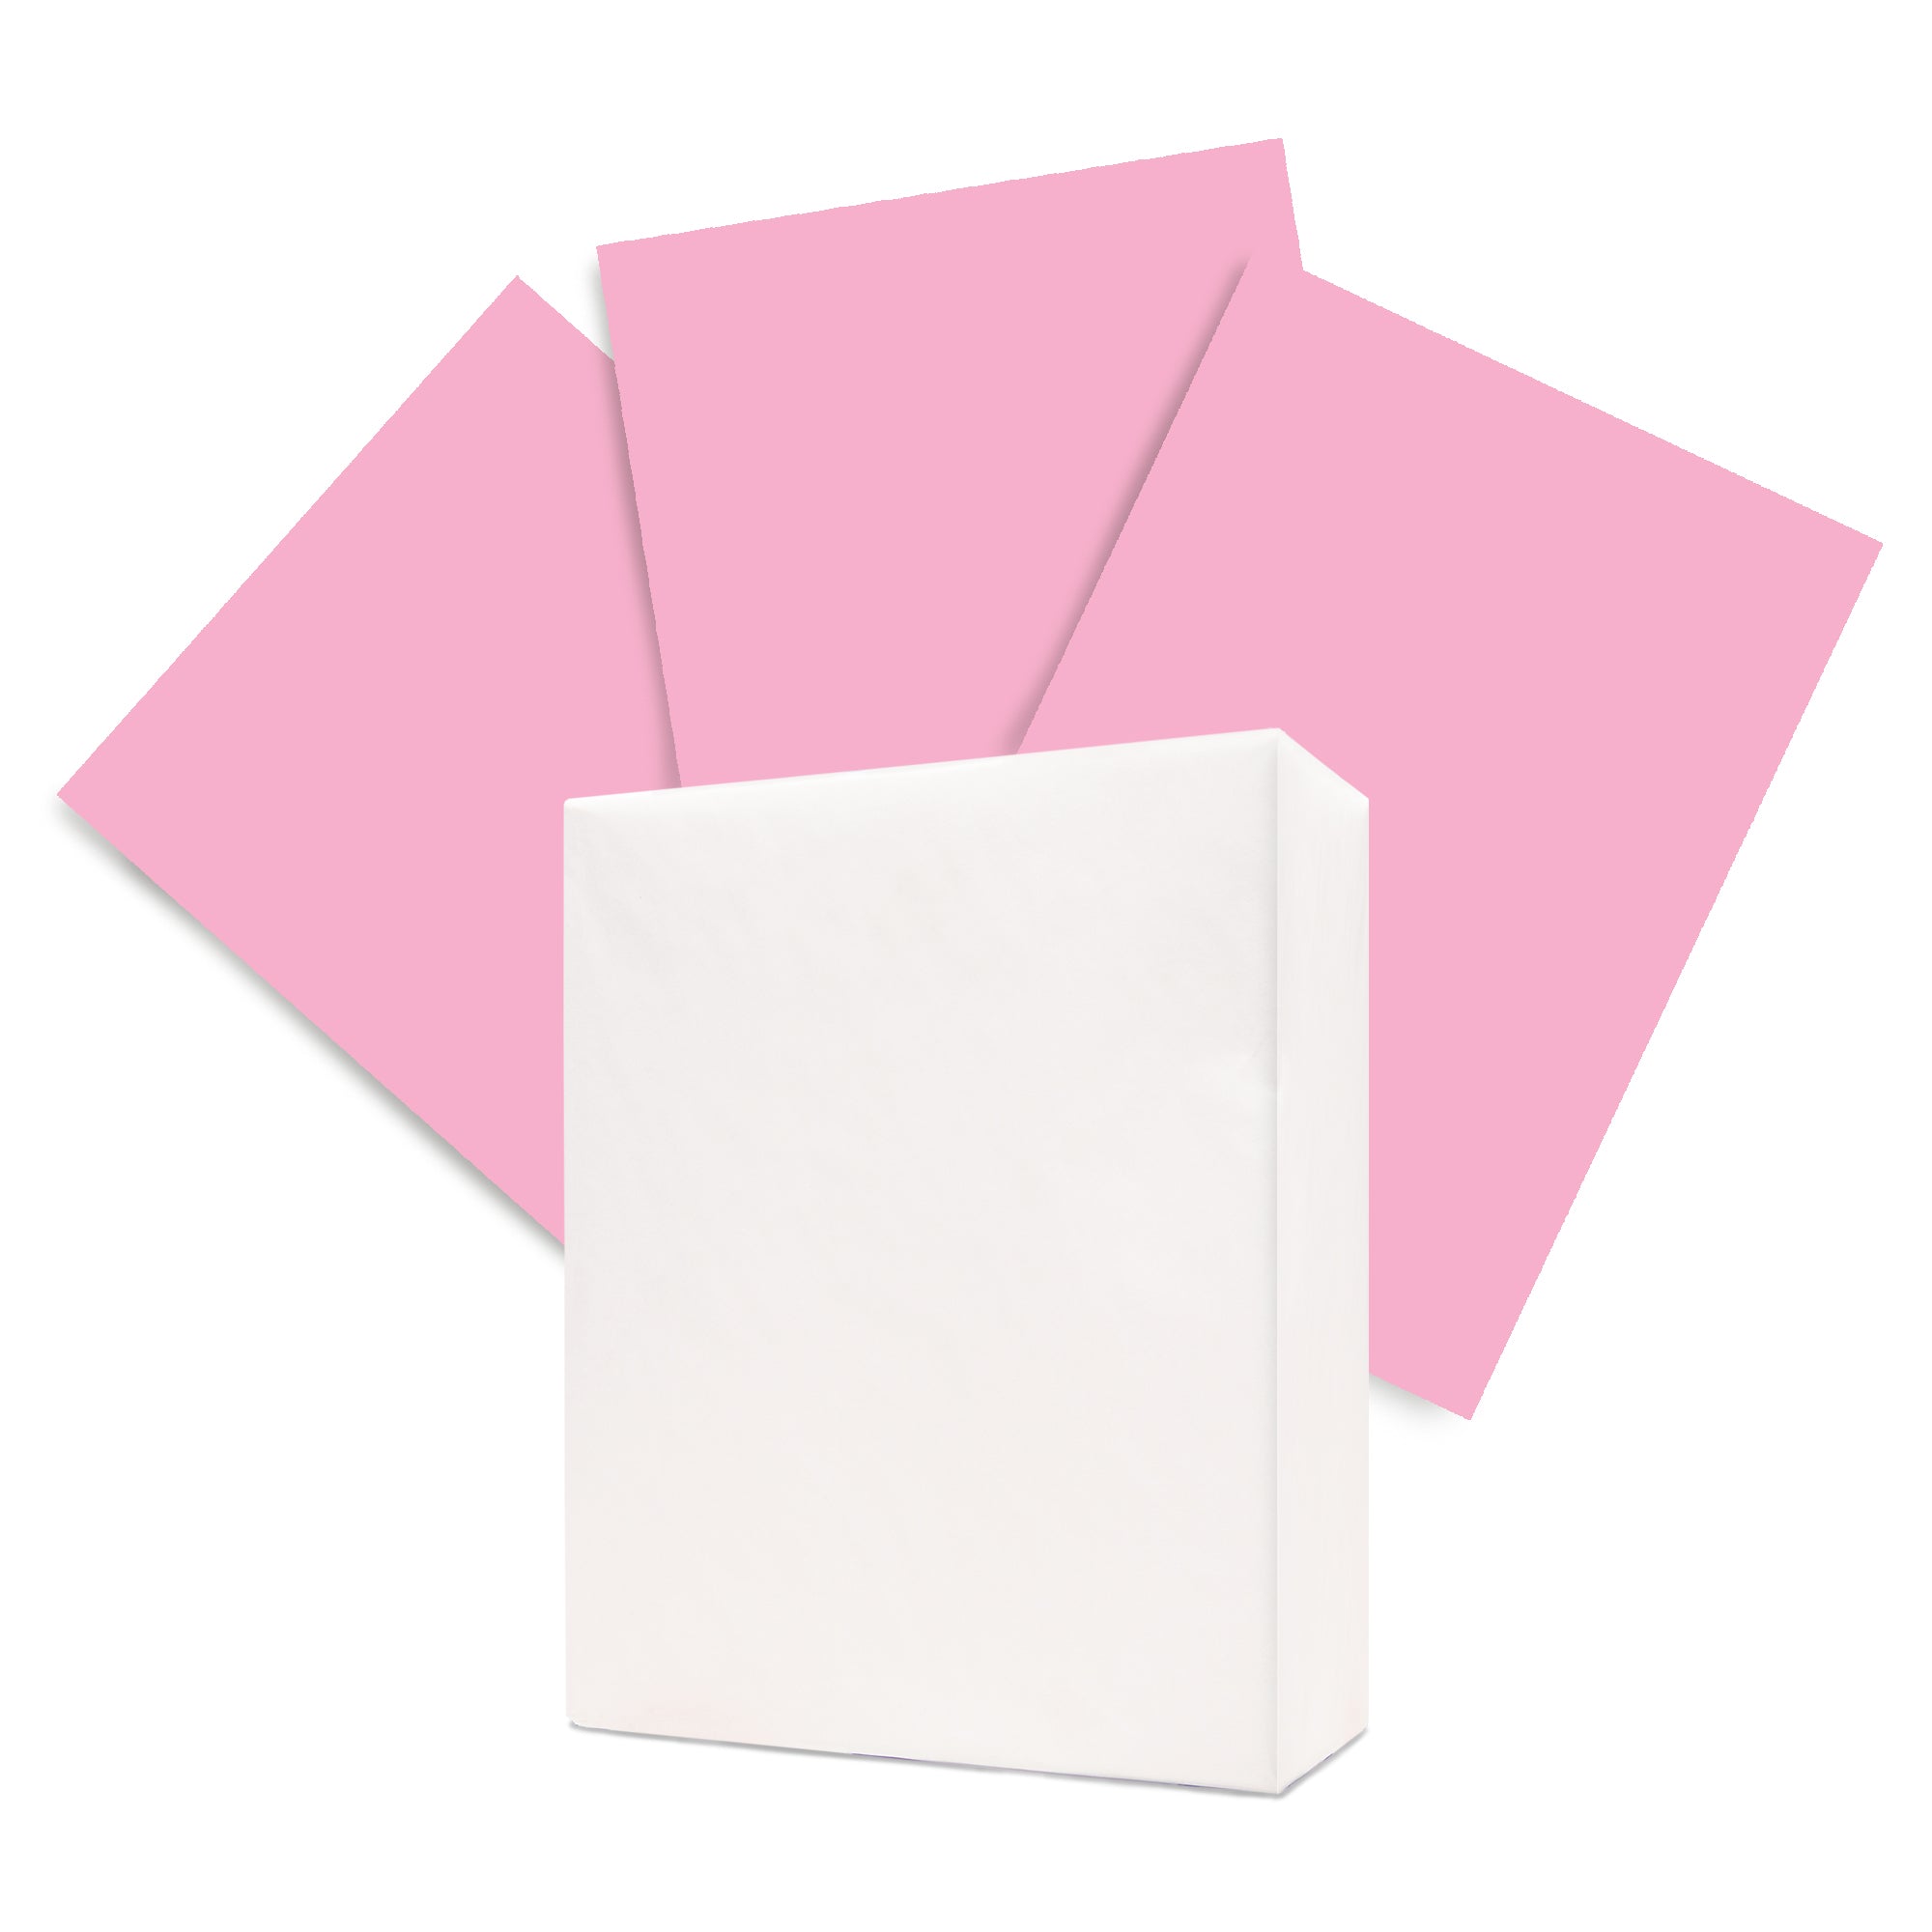 Copy Paper, Color Copy Paper, Laser And Inkjet Compatible, Made In The USA  - PINK Paper - 20 lb - 8.5 x 11 - 500 Sheet Ream